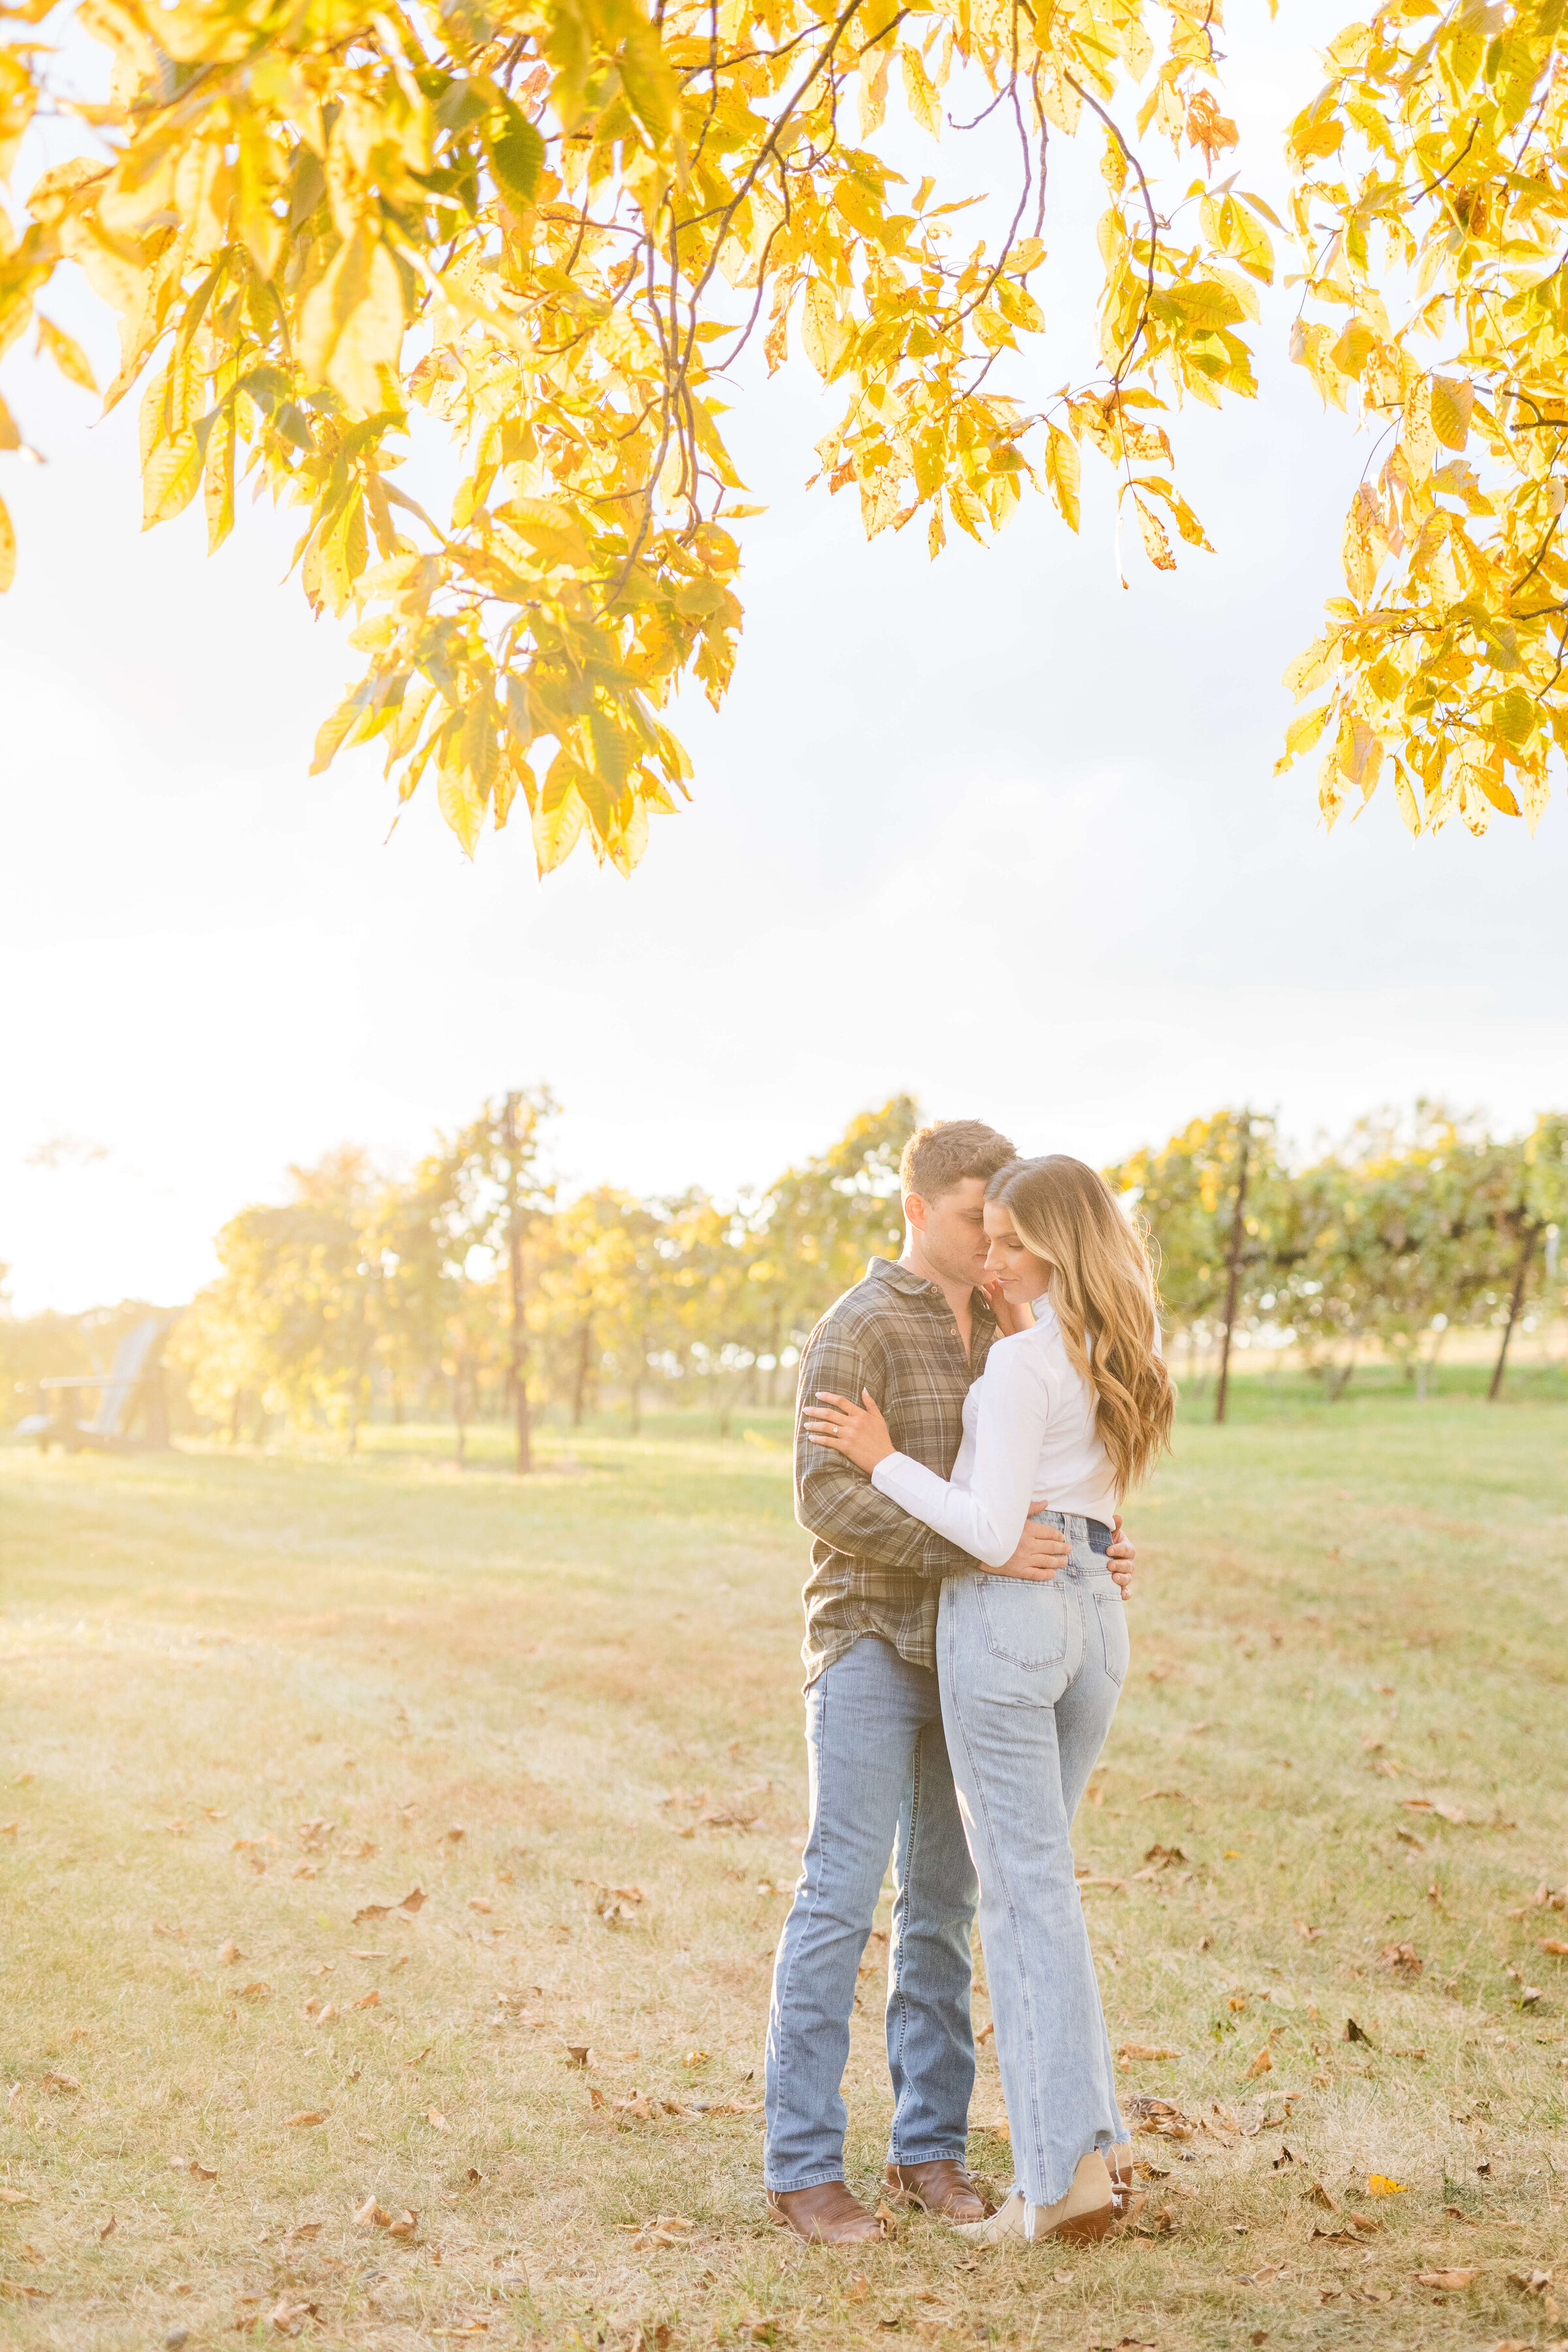 A man and woman hold each other under a fall tree at a vineyard. The sun is shining through the tree as well. They are in jeans and casual shirts.